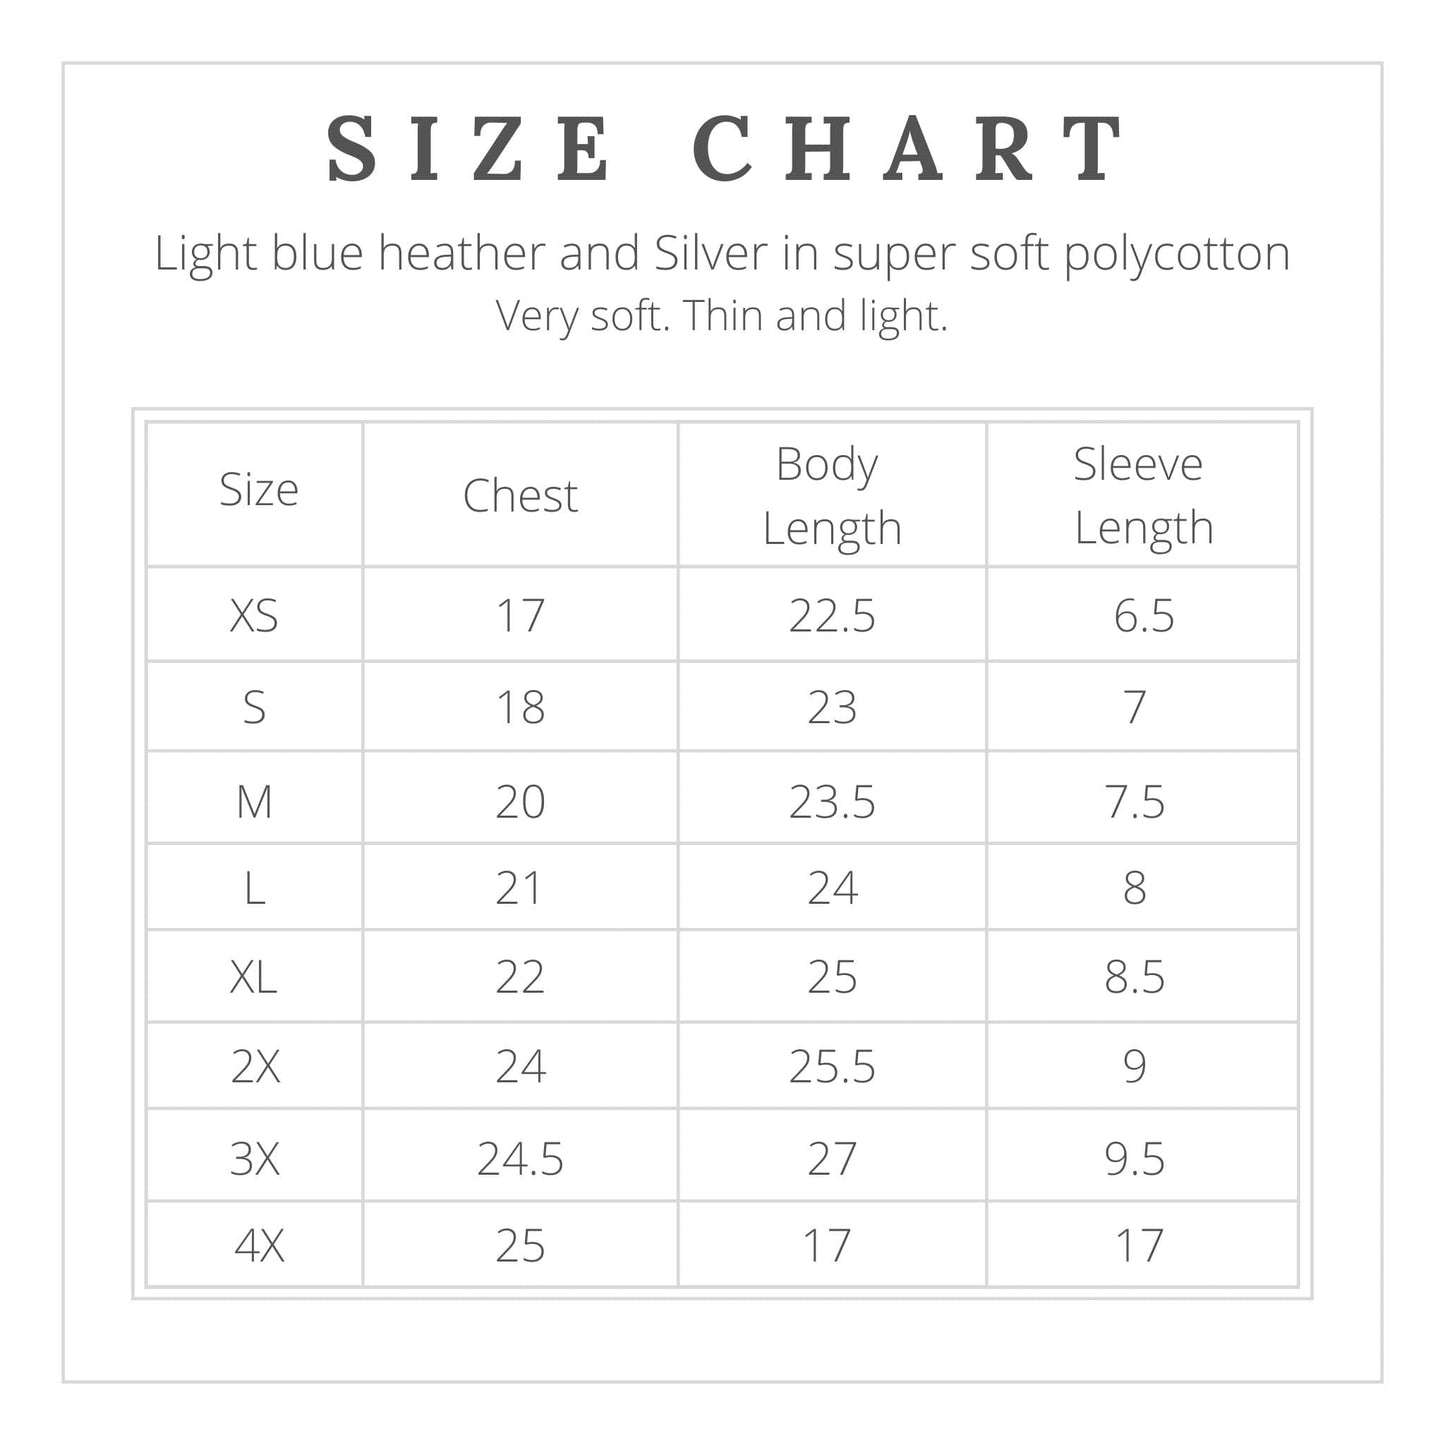 Size chart of the polycotton shirt of the "We hold these truths - July 4, 1776” T-shirt from The History List store